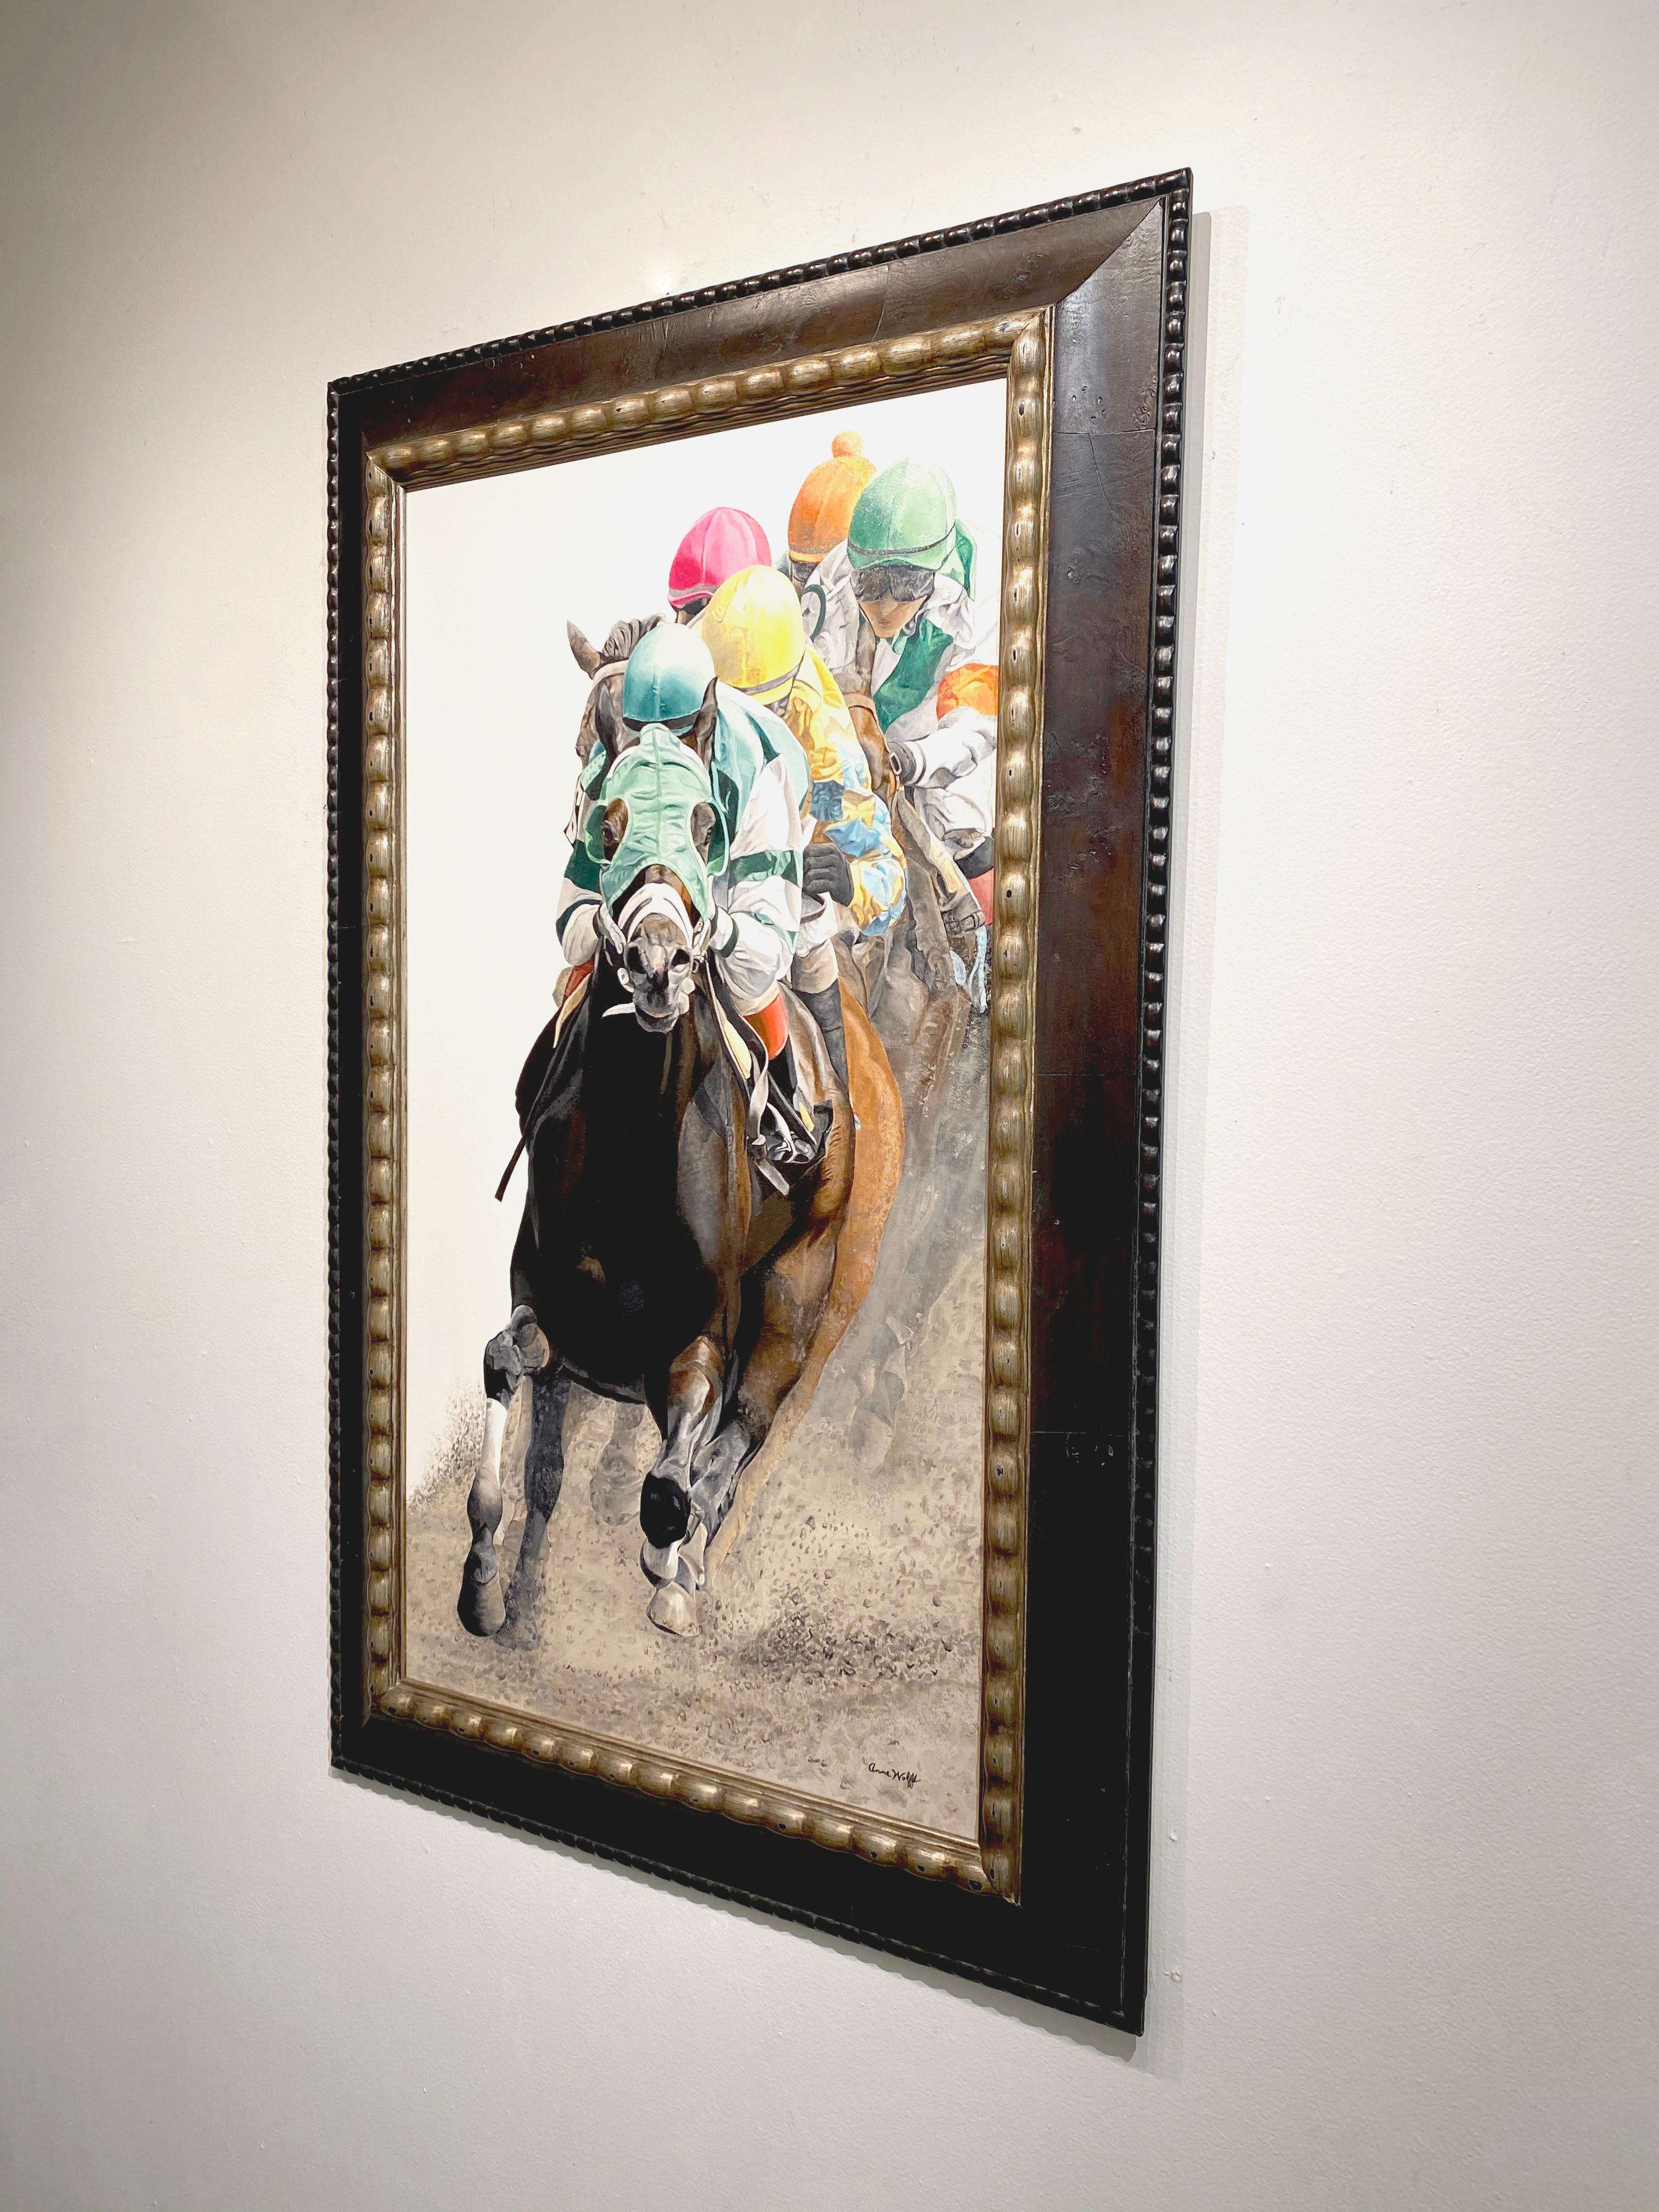 This equine racing painting 